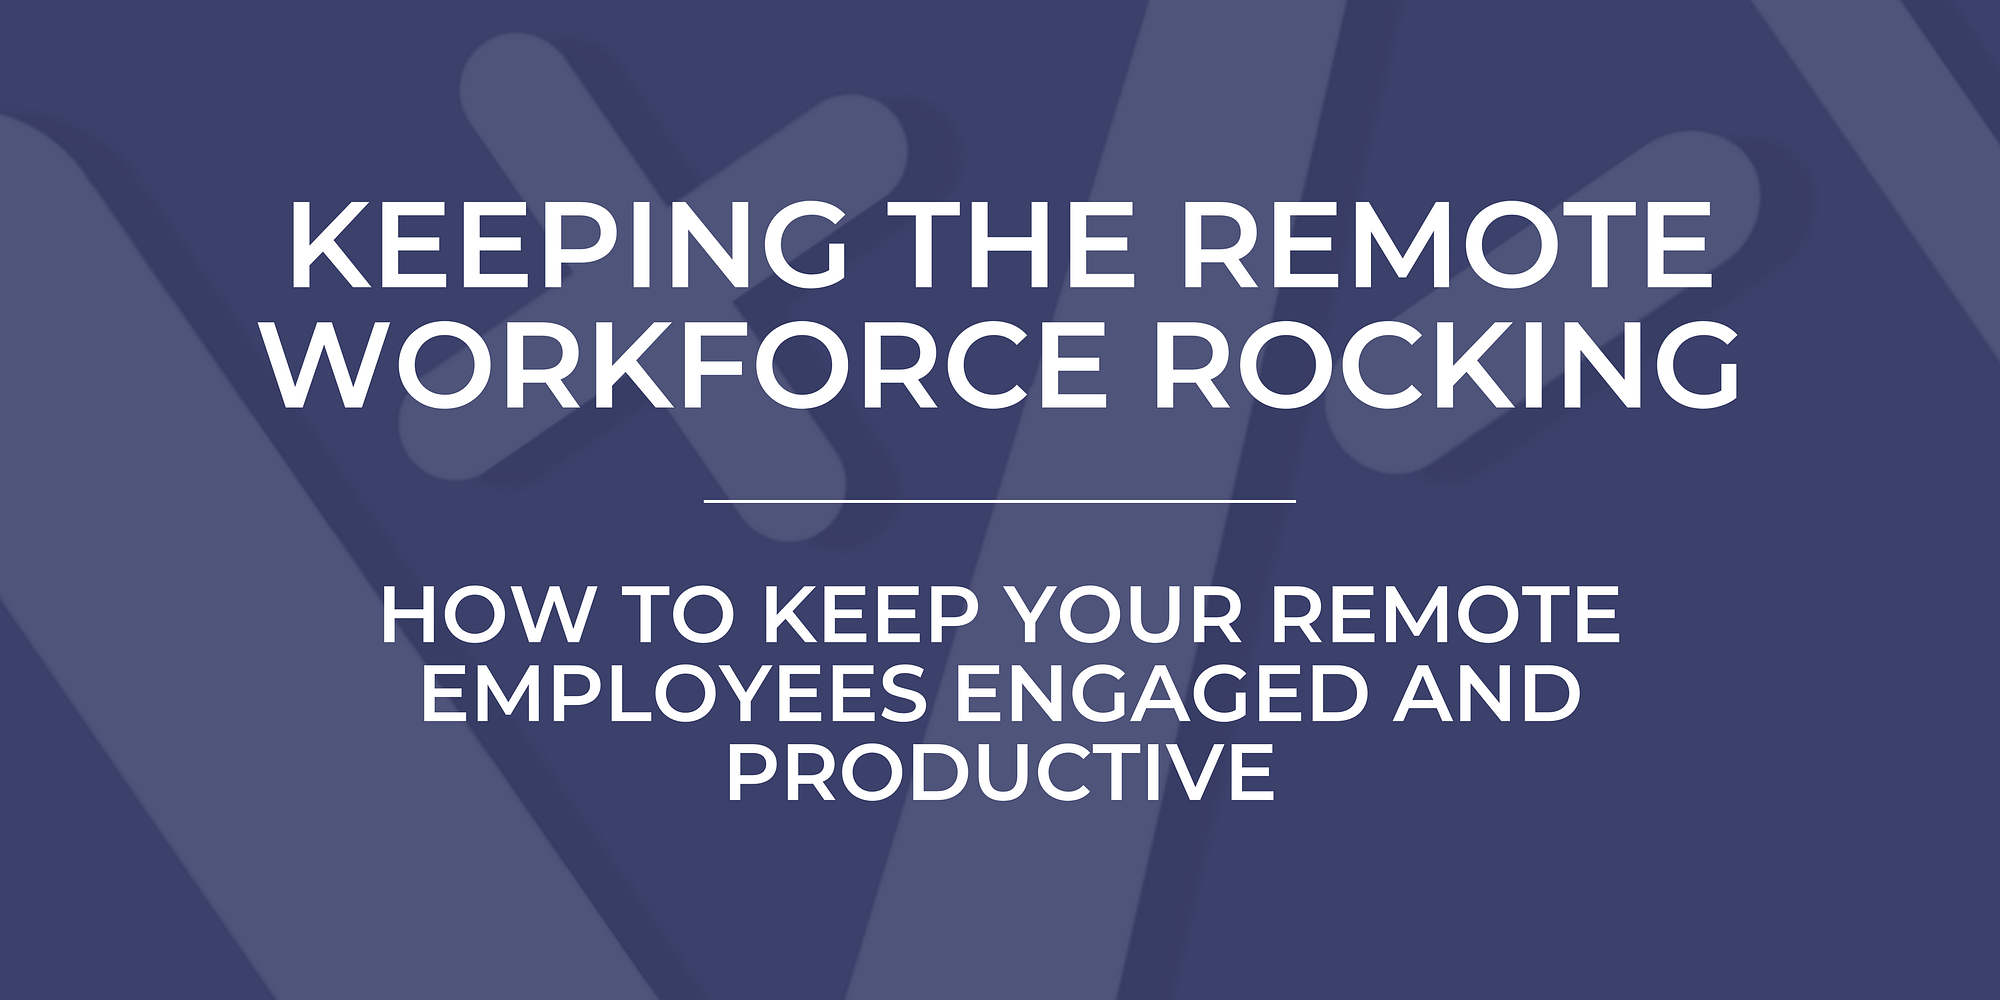 Keeping the Remote Workforce Rocking: How to Keep Remote Employees Engaged and Productive